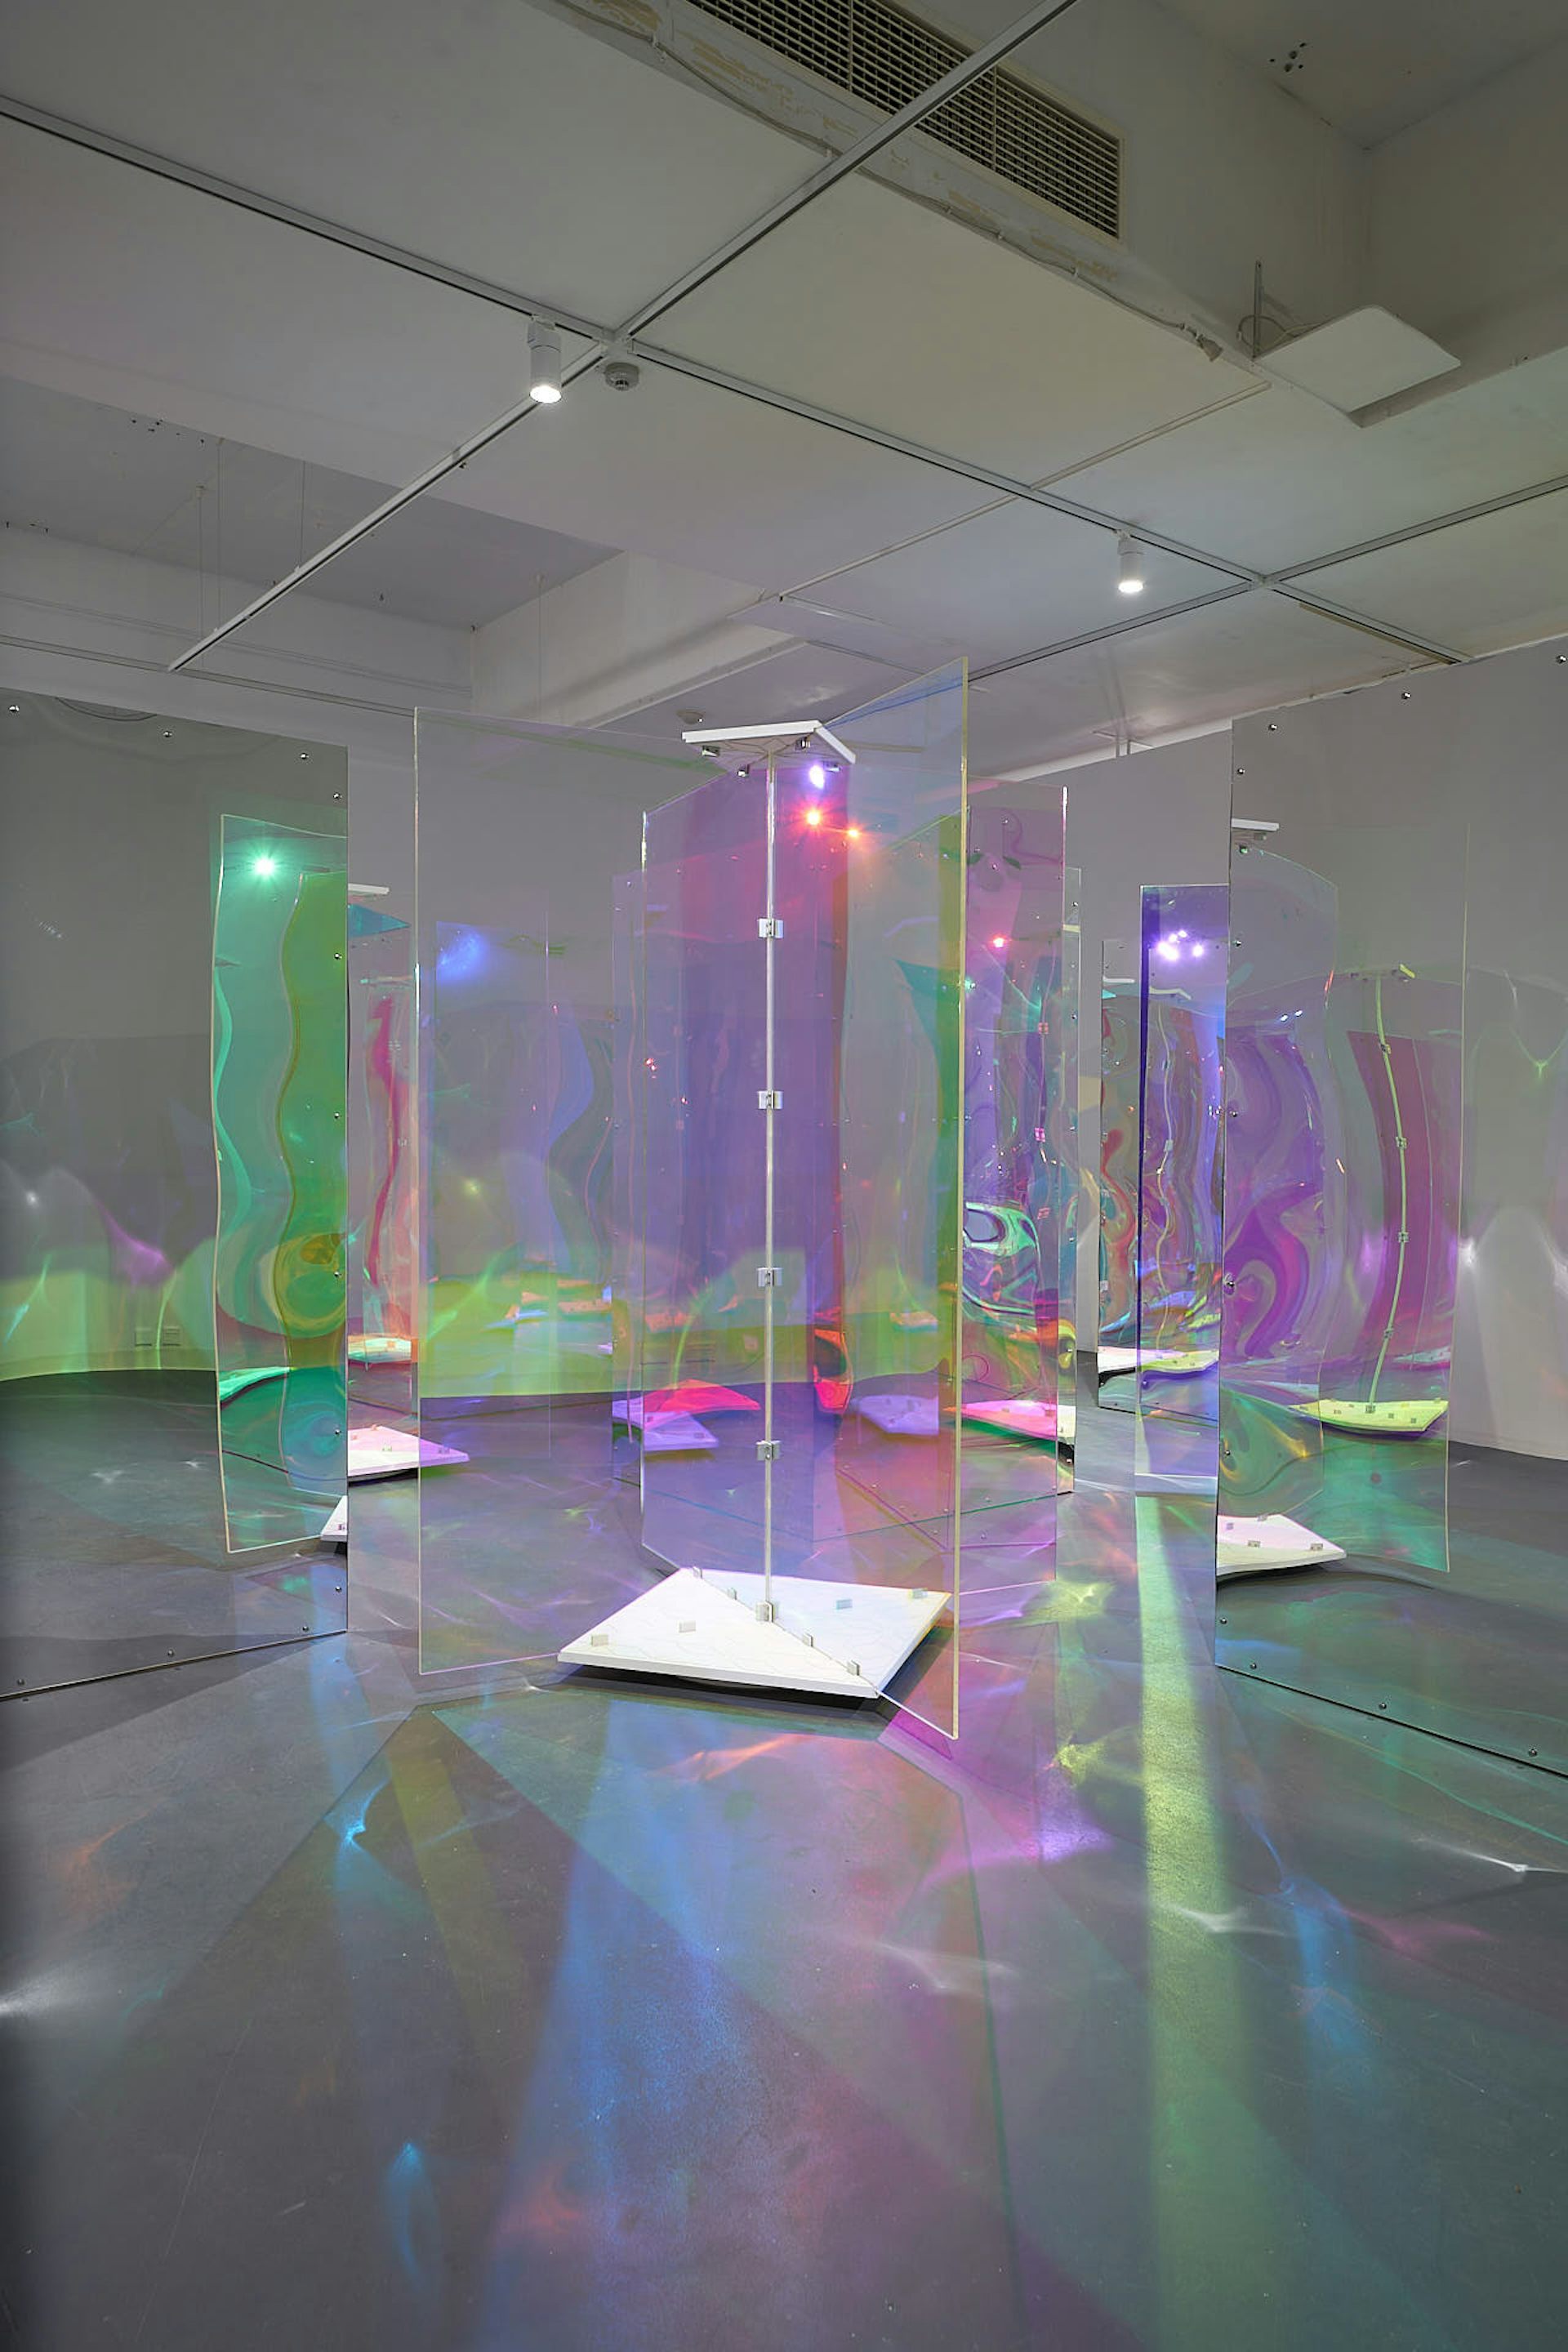 A room filled with glowing perspex doors